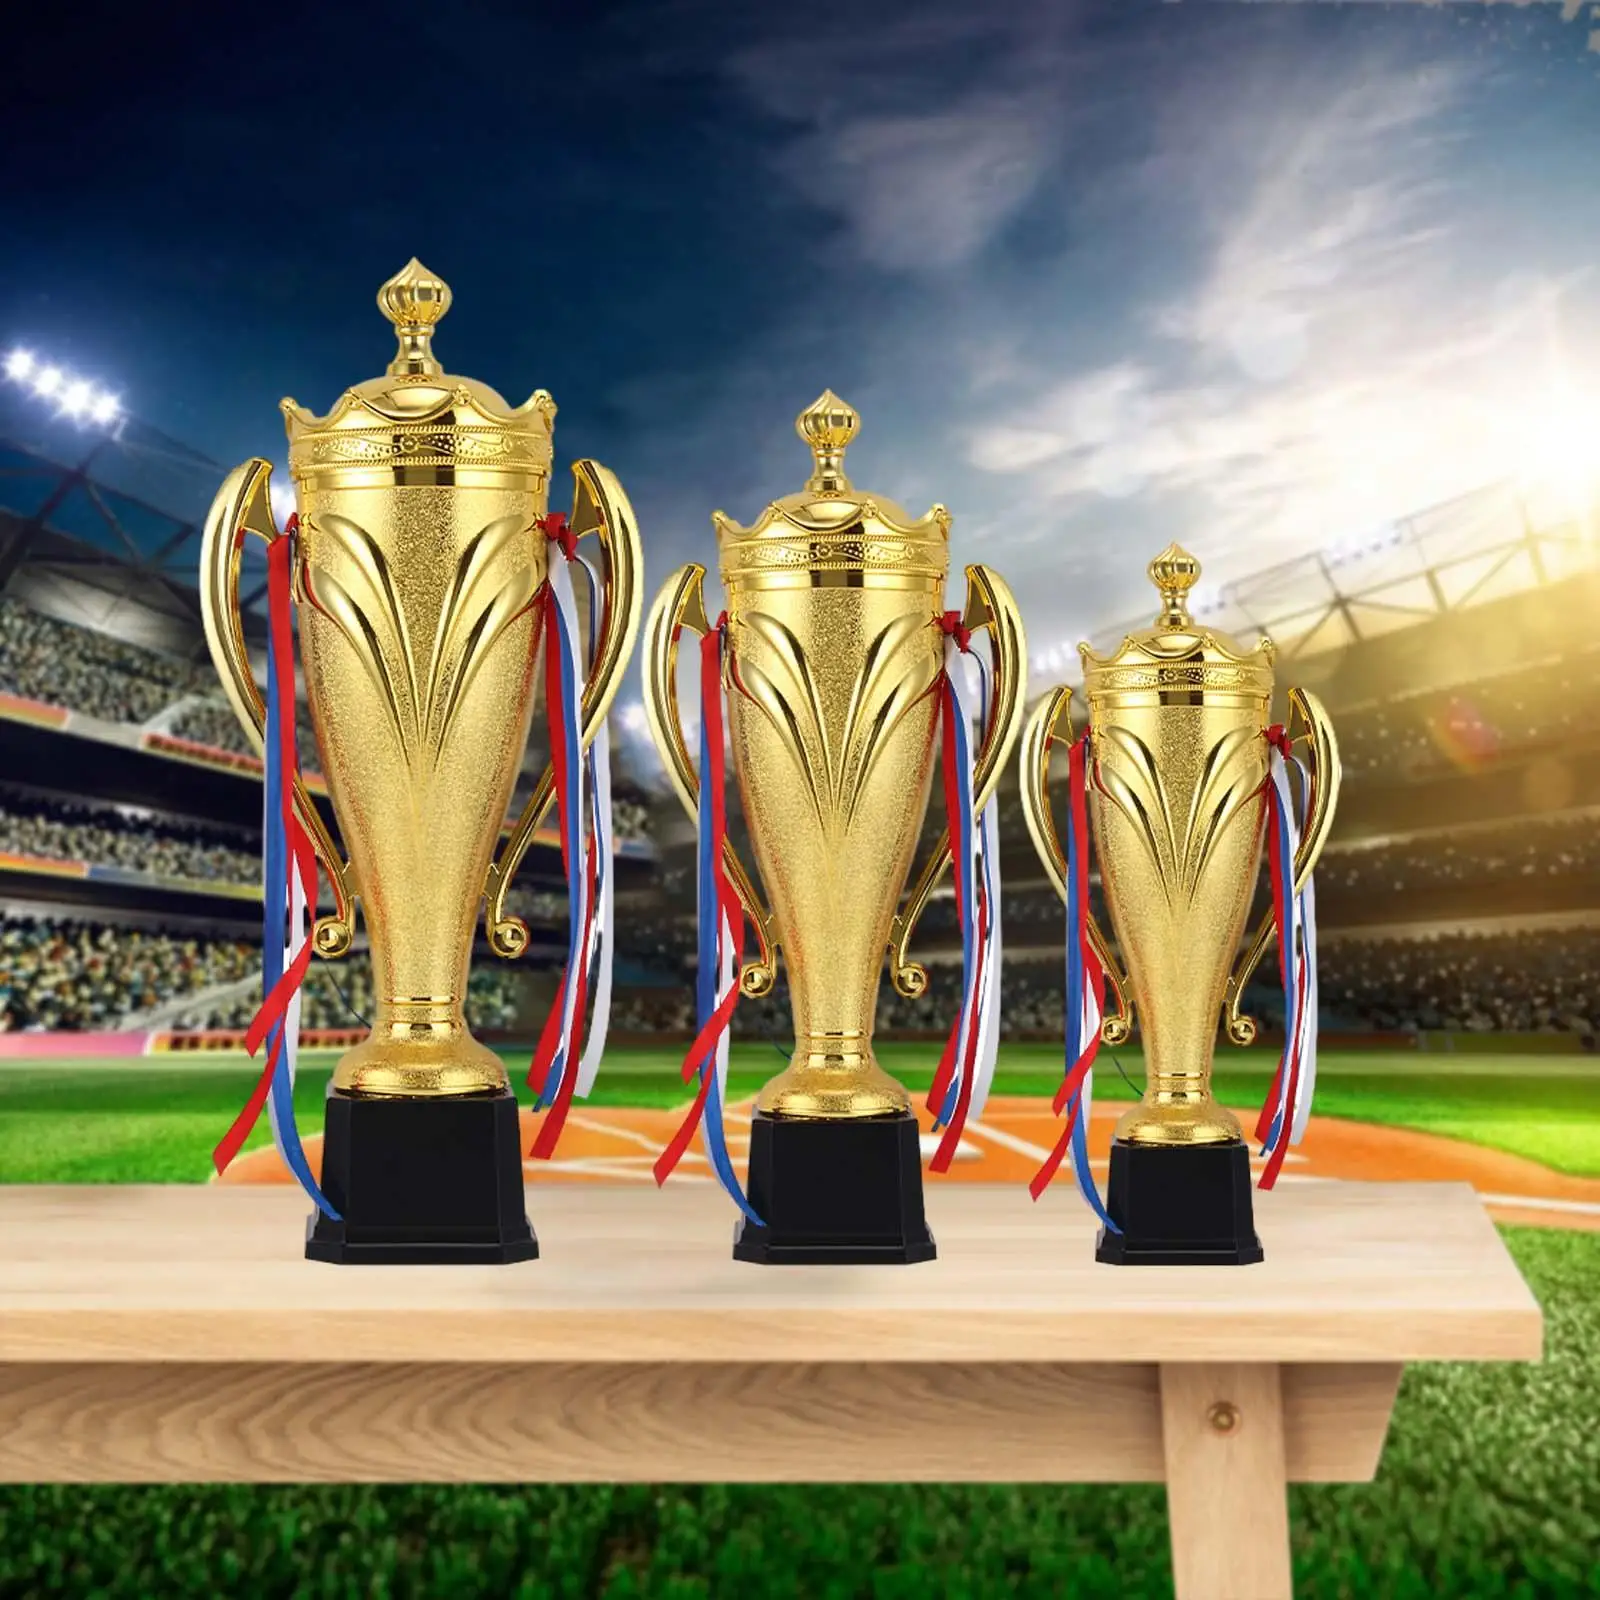 PP Material Winner Award Trophies Cup Gold Color for Children Competitions